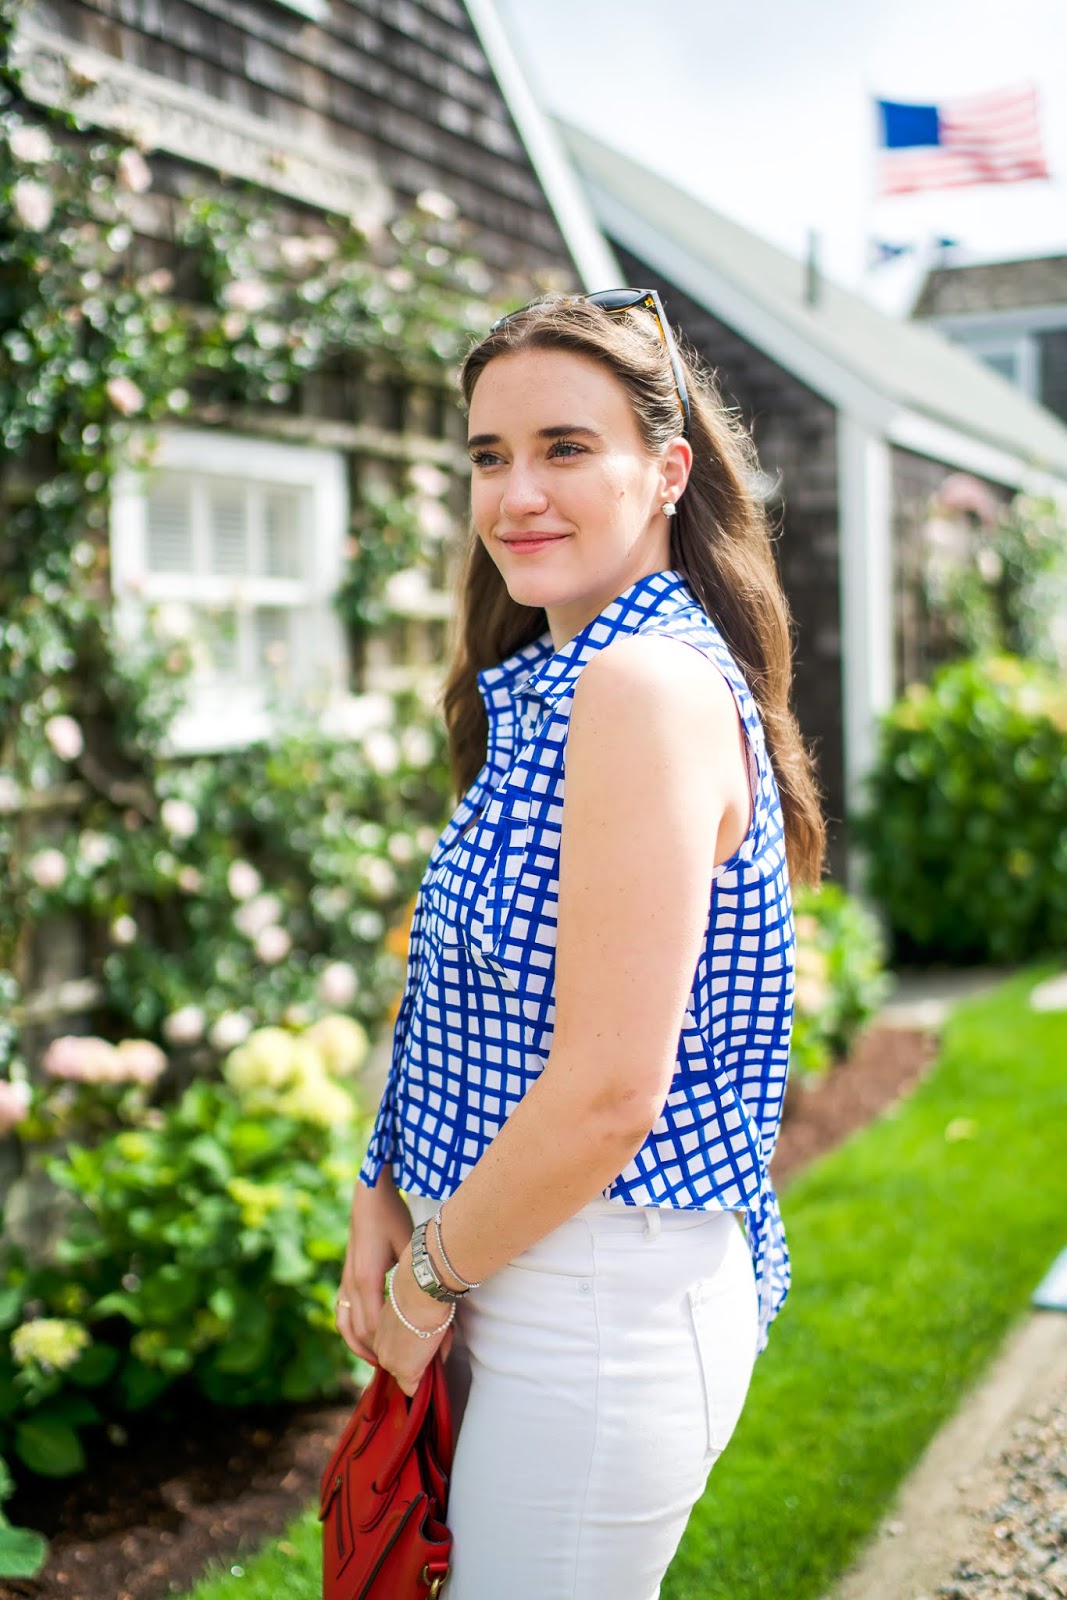 The Perfect Summer Outfit for a Stroll in Nantucket featured by popular New York fashion blogger, Covering the Bases